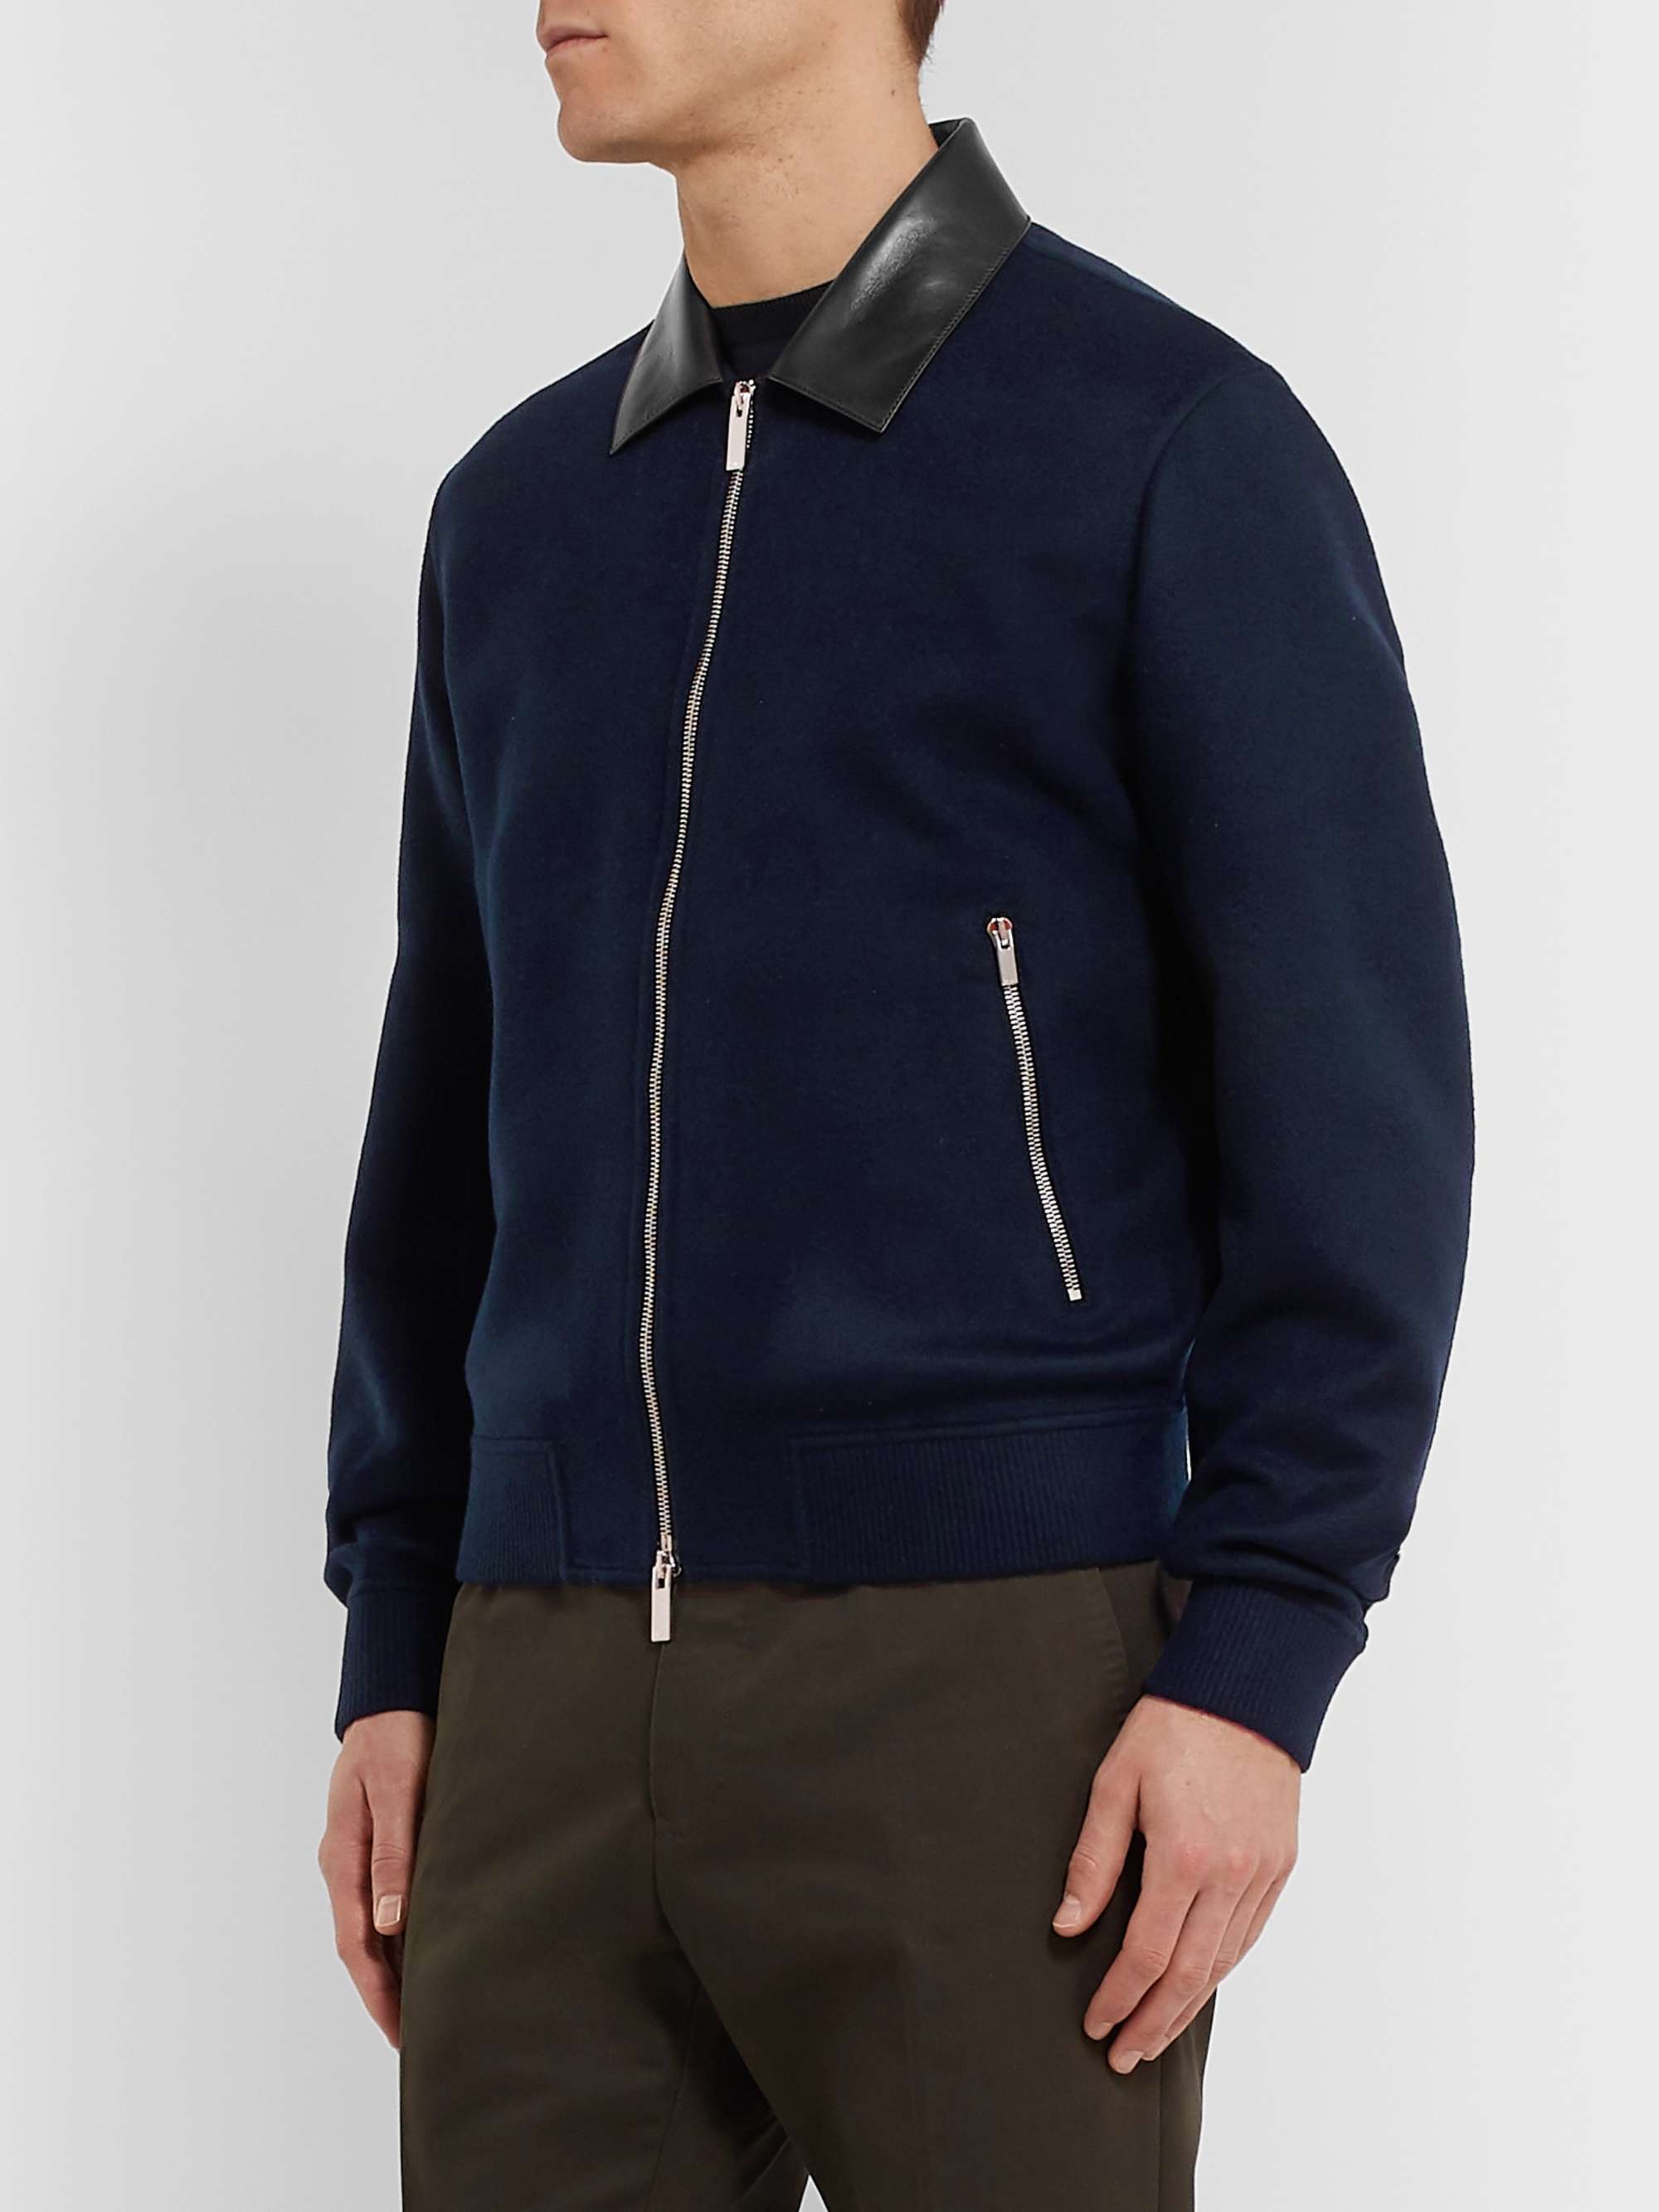 BERLUTI Leather-Trimmed Cashmere Bomber Jacket